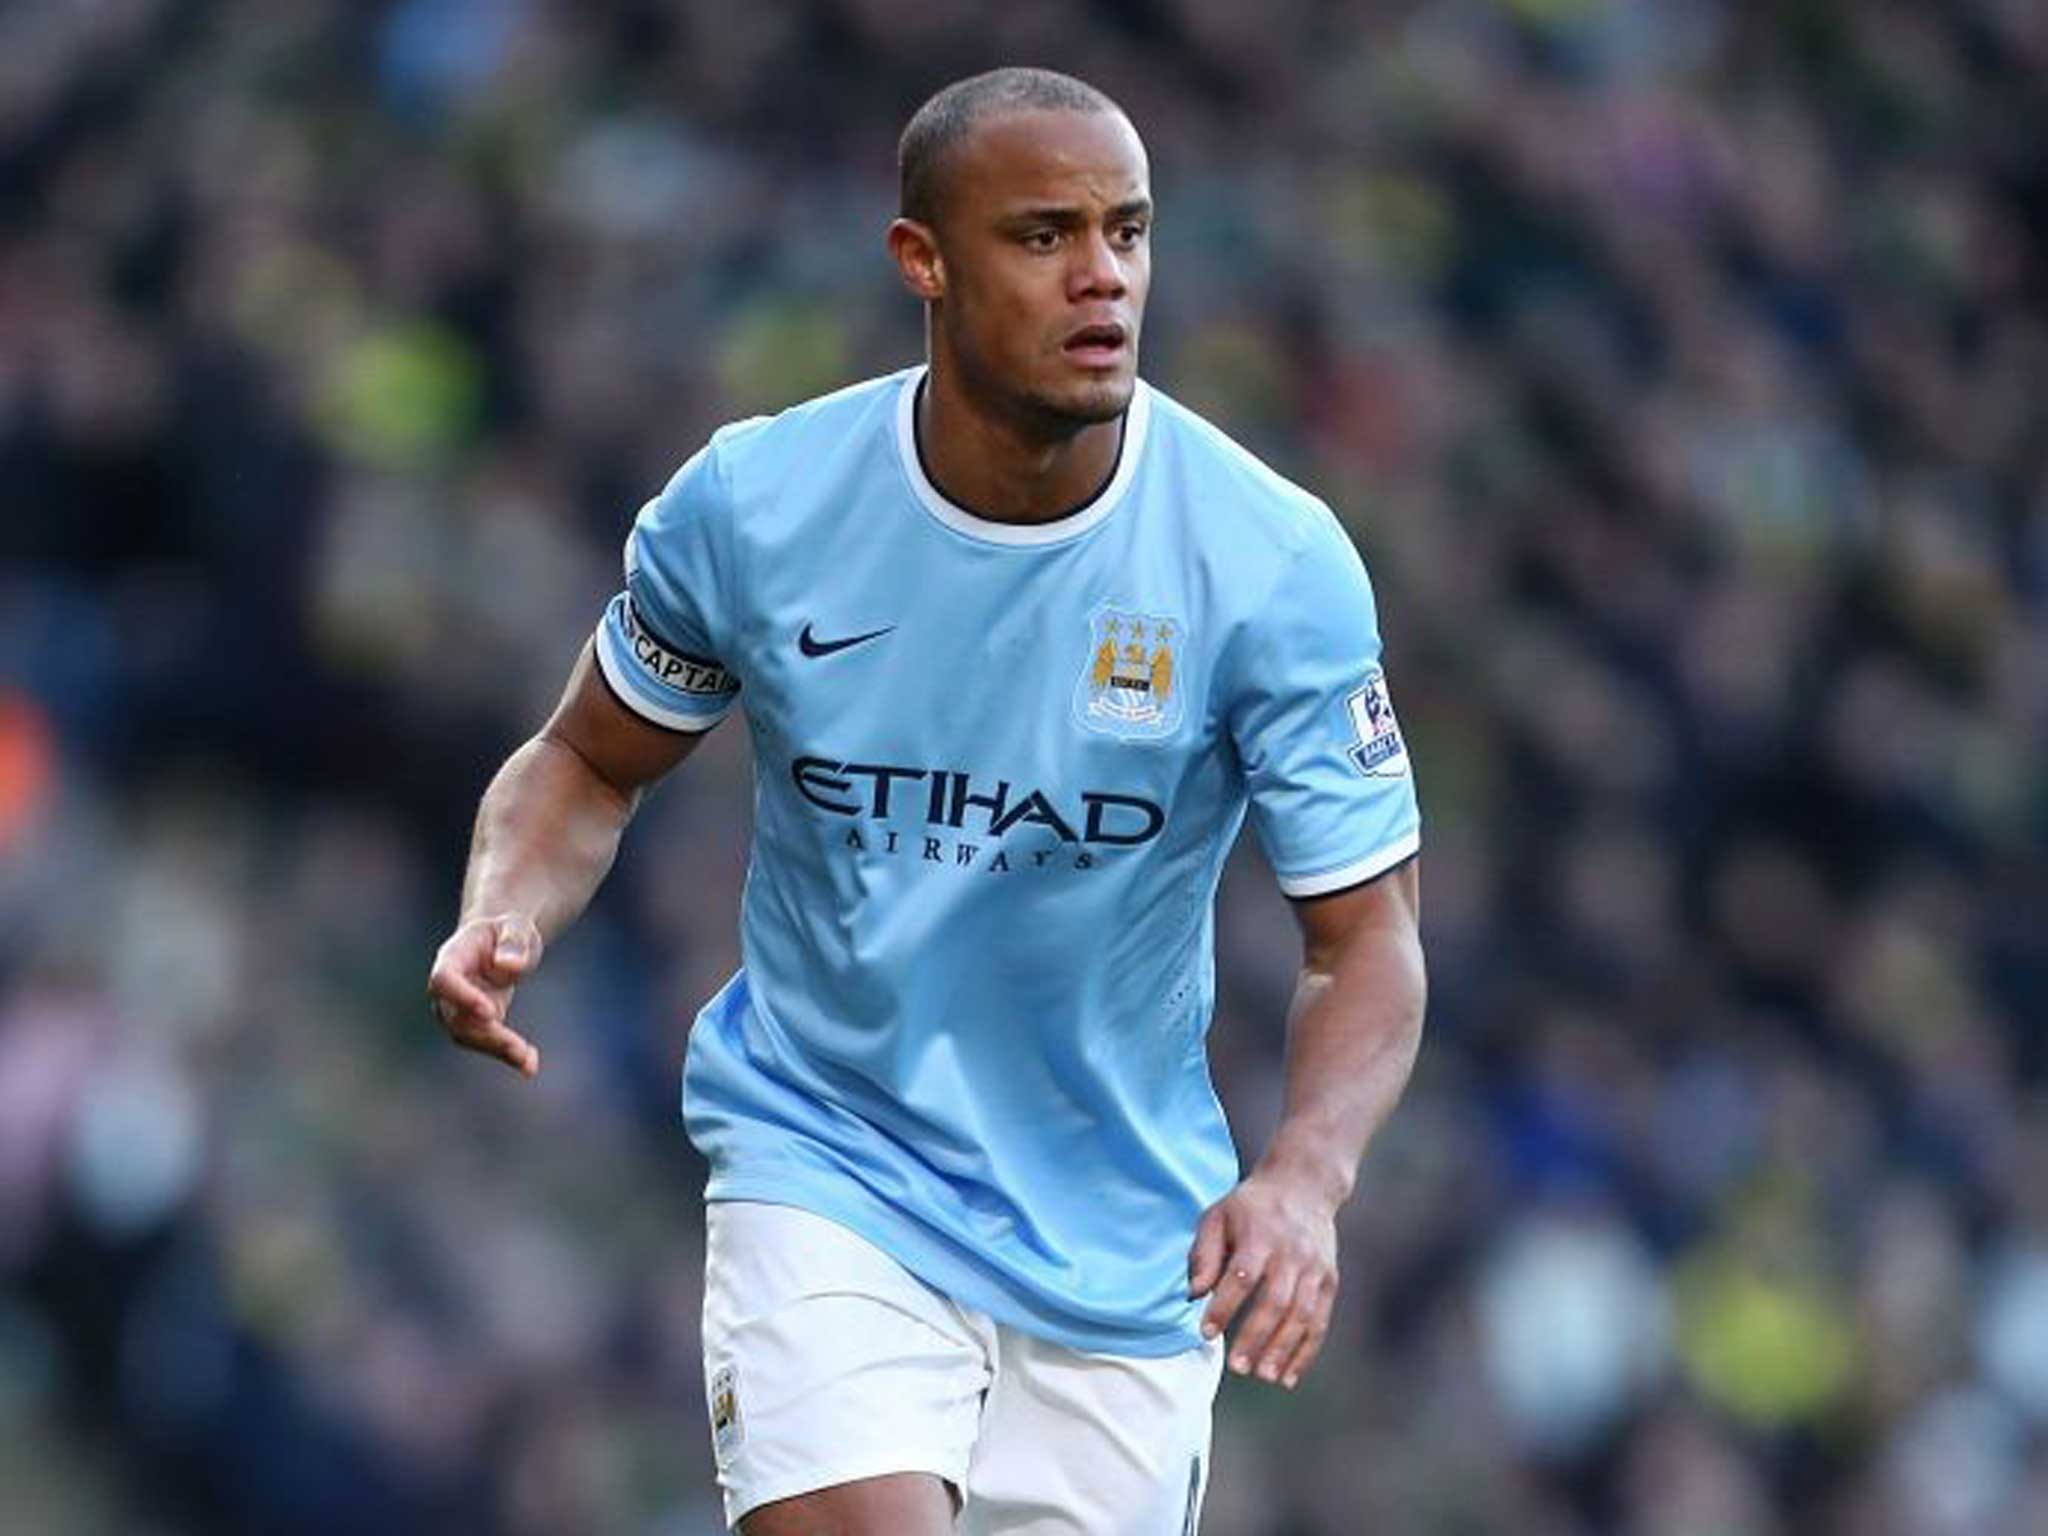 Vincent Kompany injured his leg in a training collision and may not be fit for the match